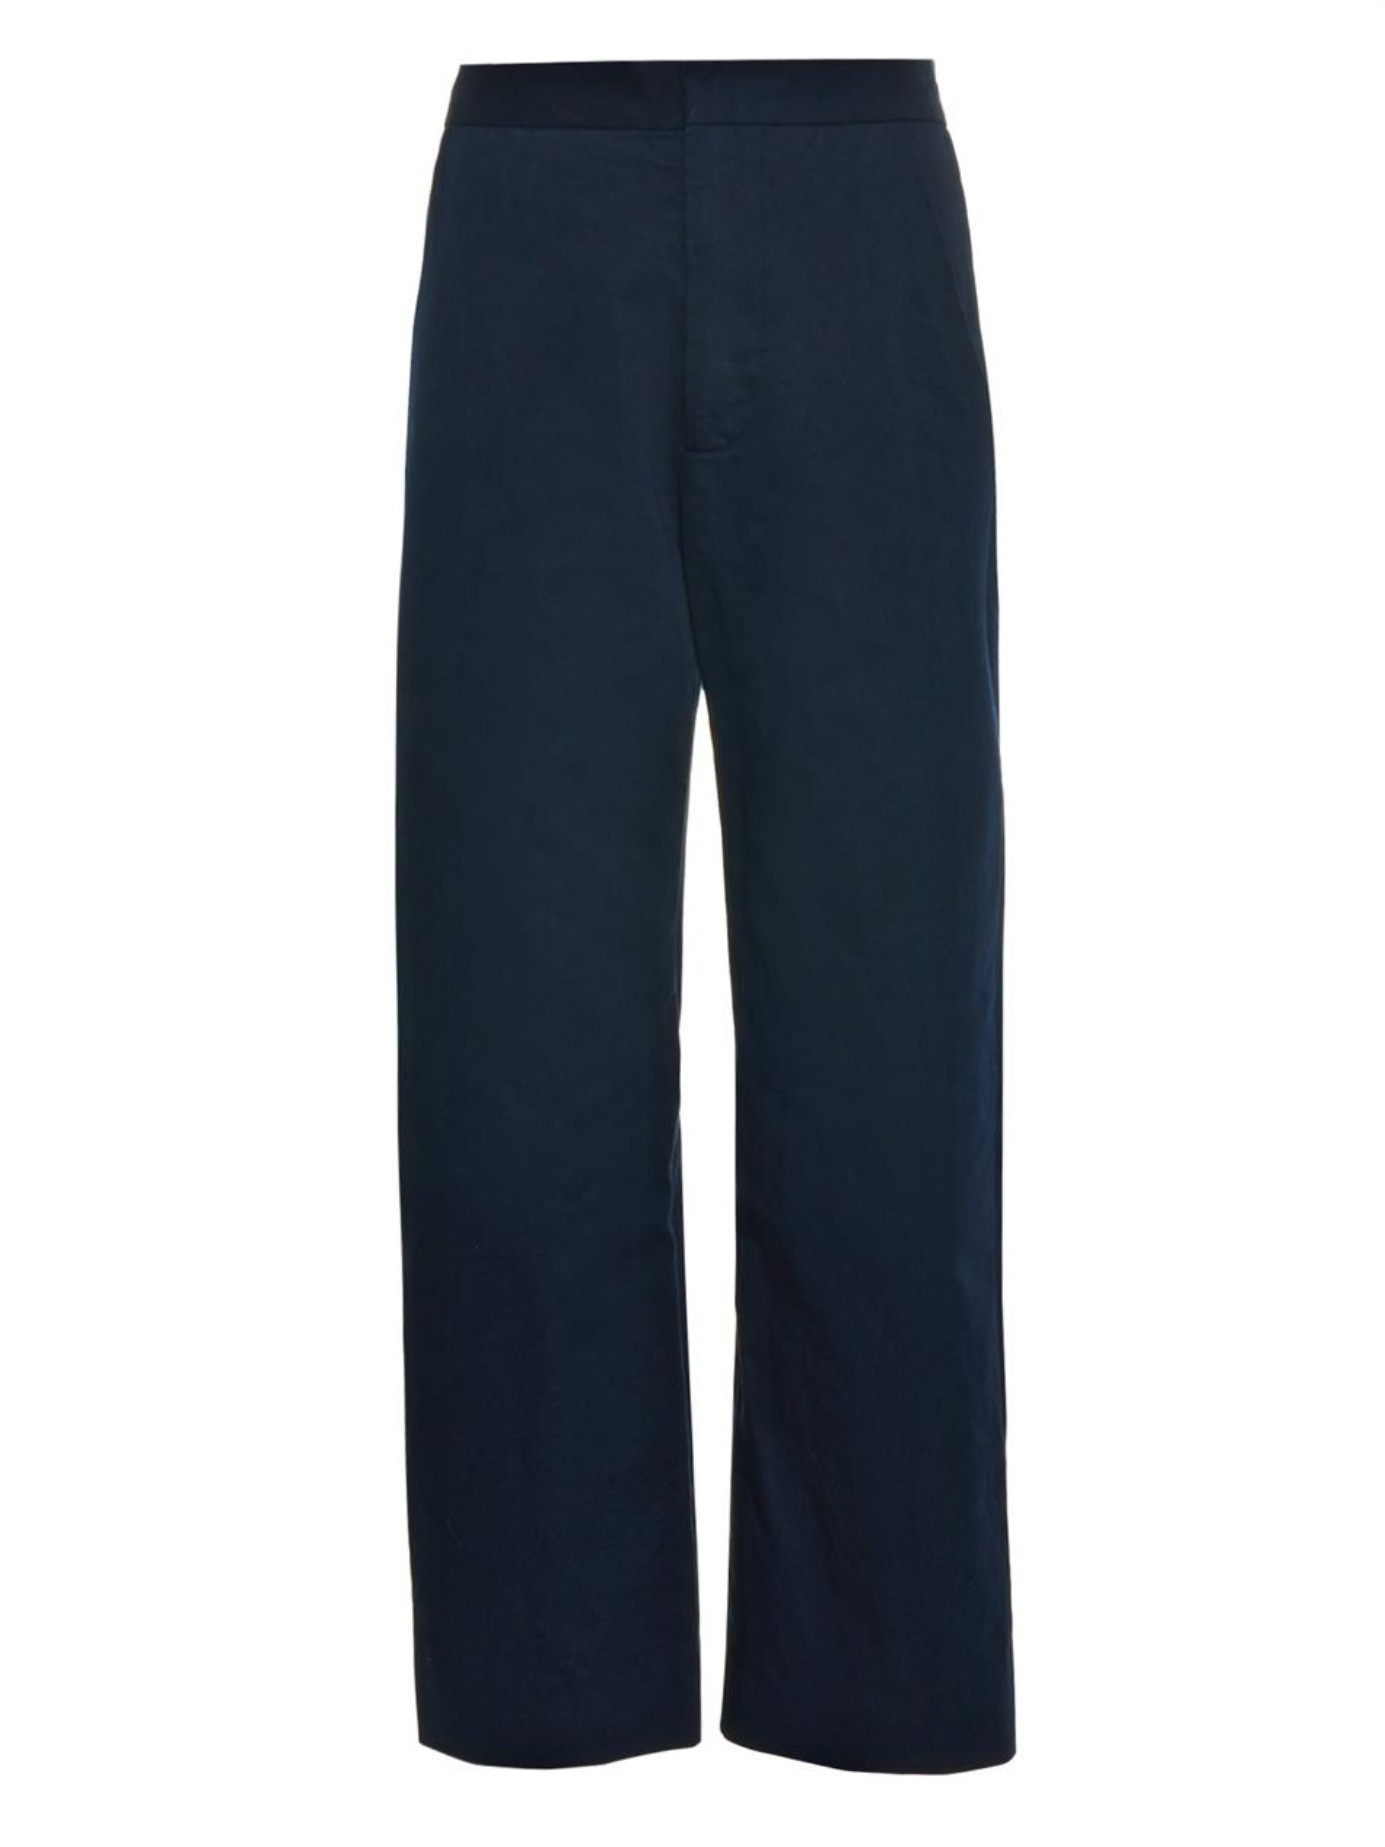 Lyst - Marni Wide-Leg Cotton And Linen-Blend Trousers in Blue